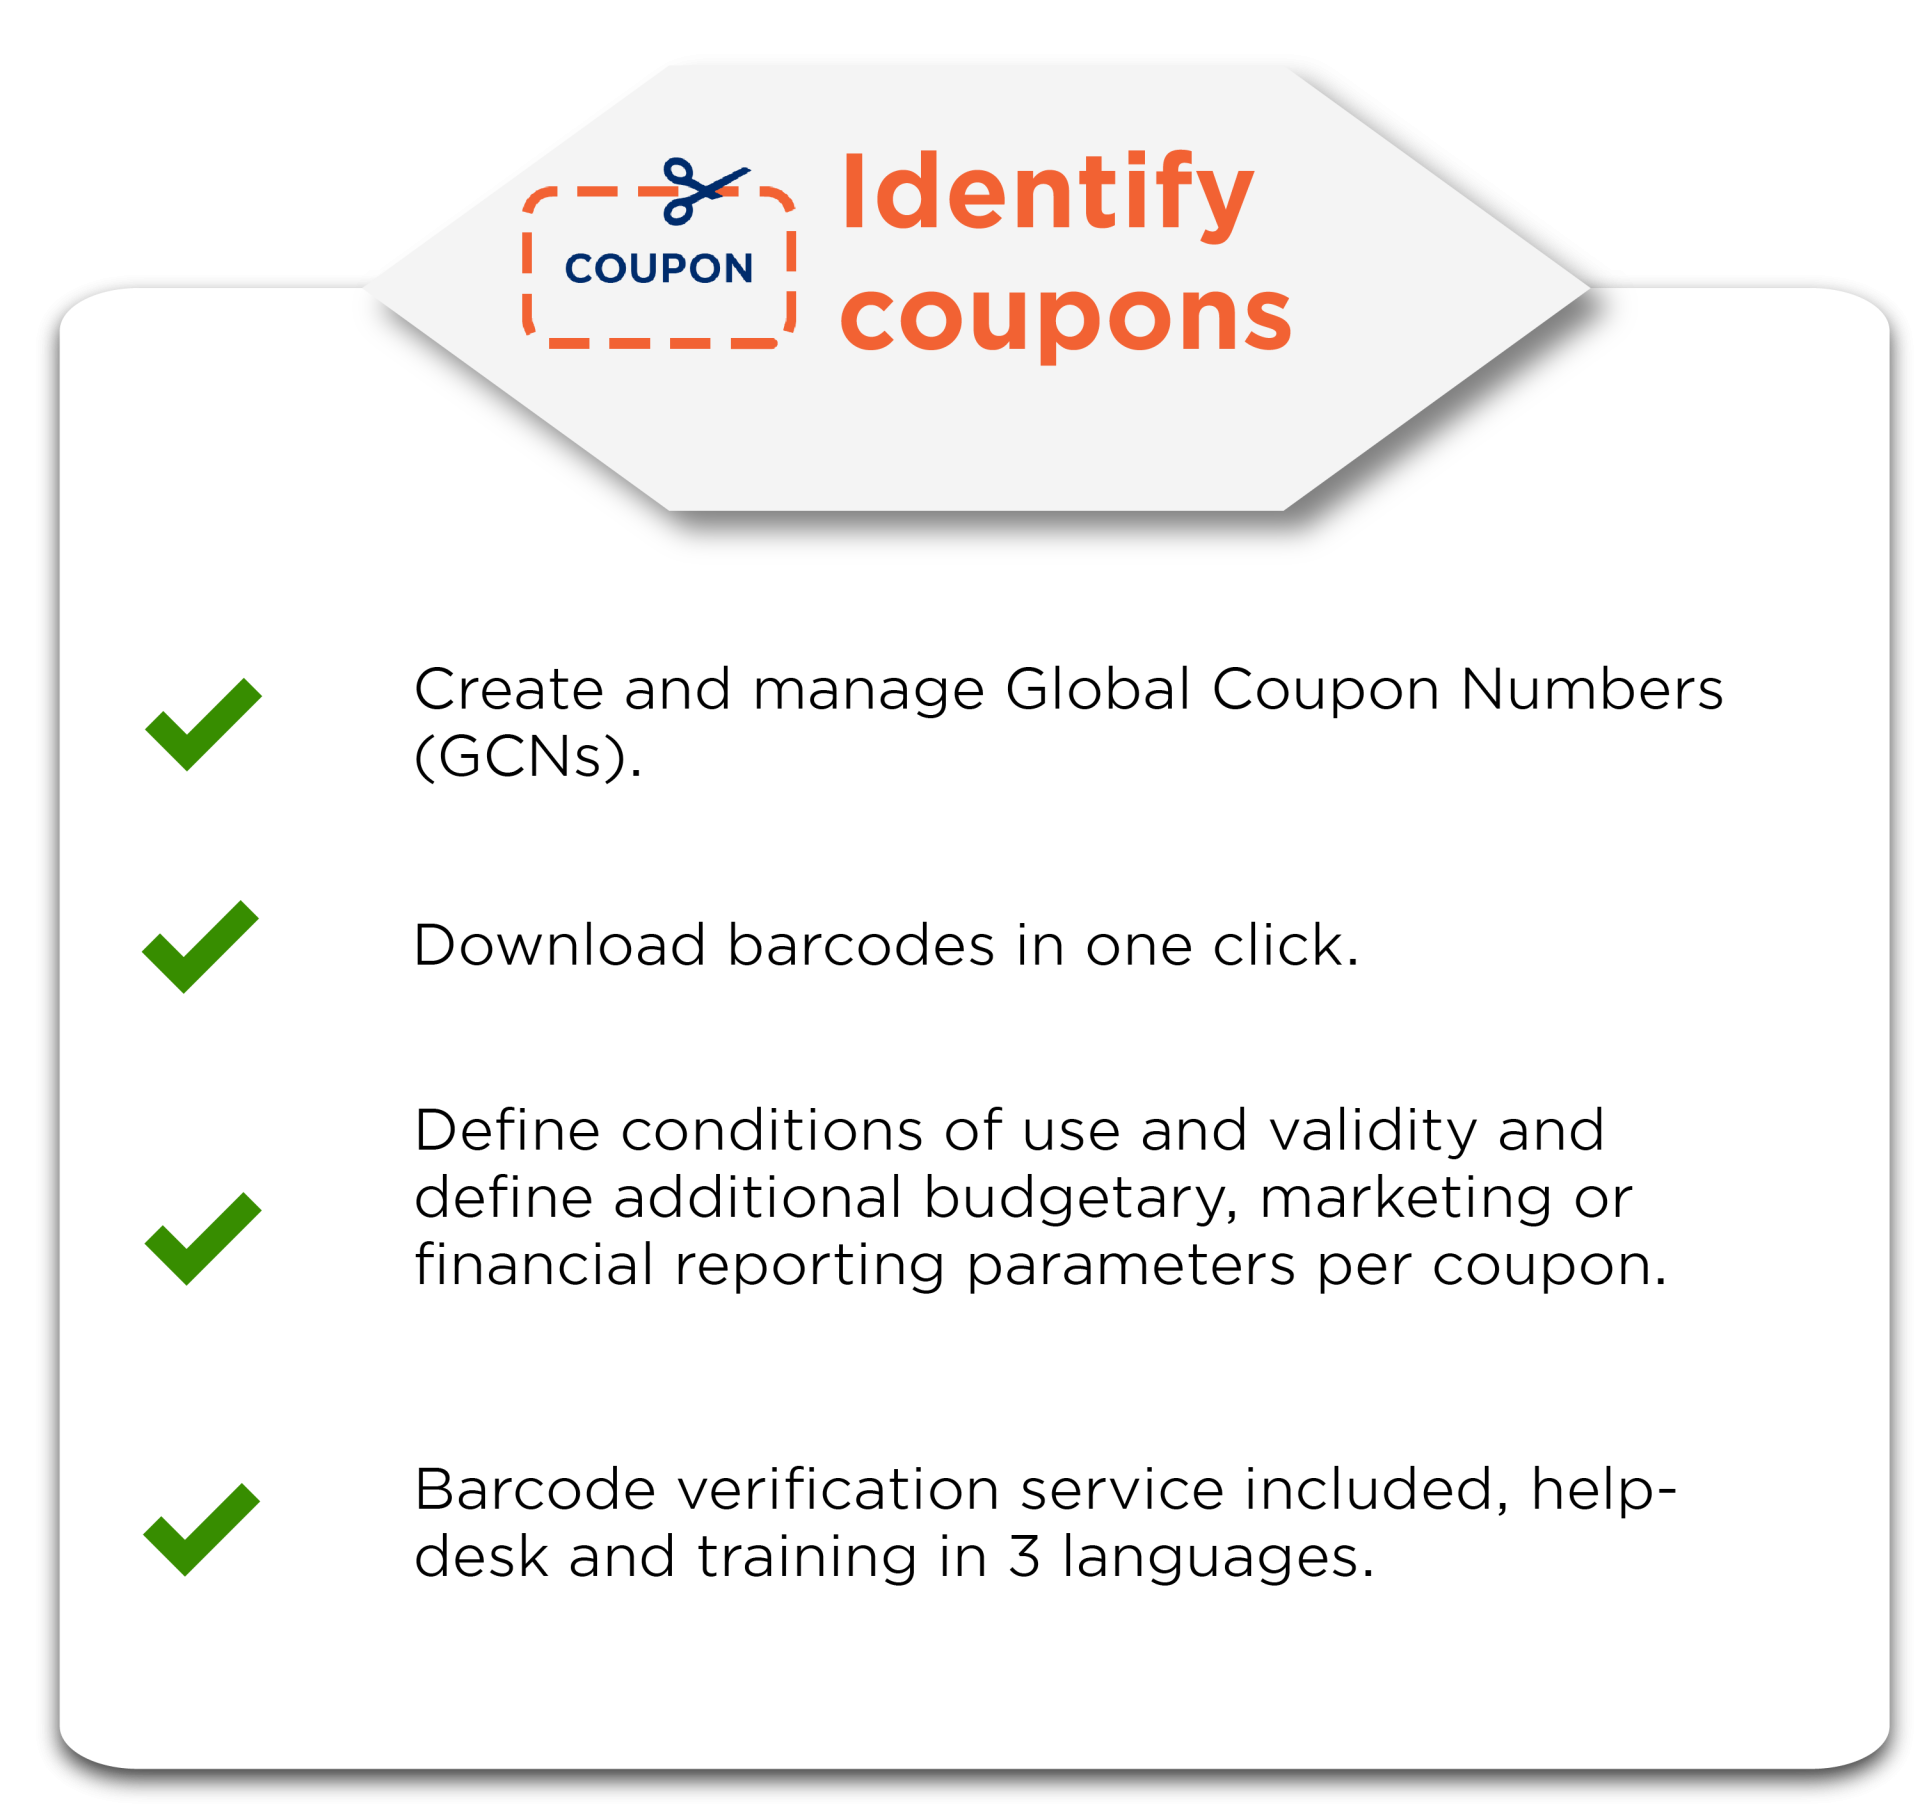 identify coupons